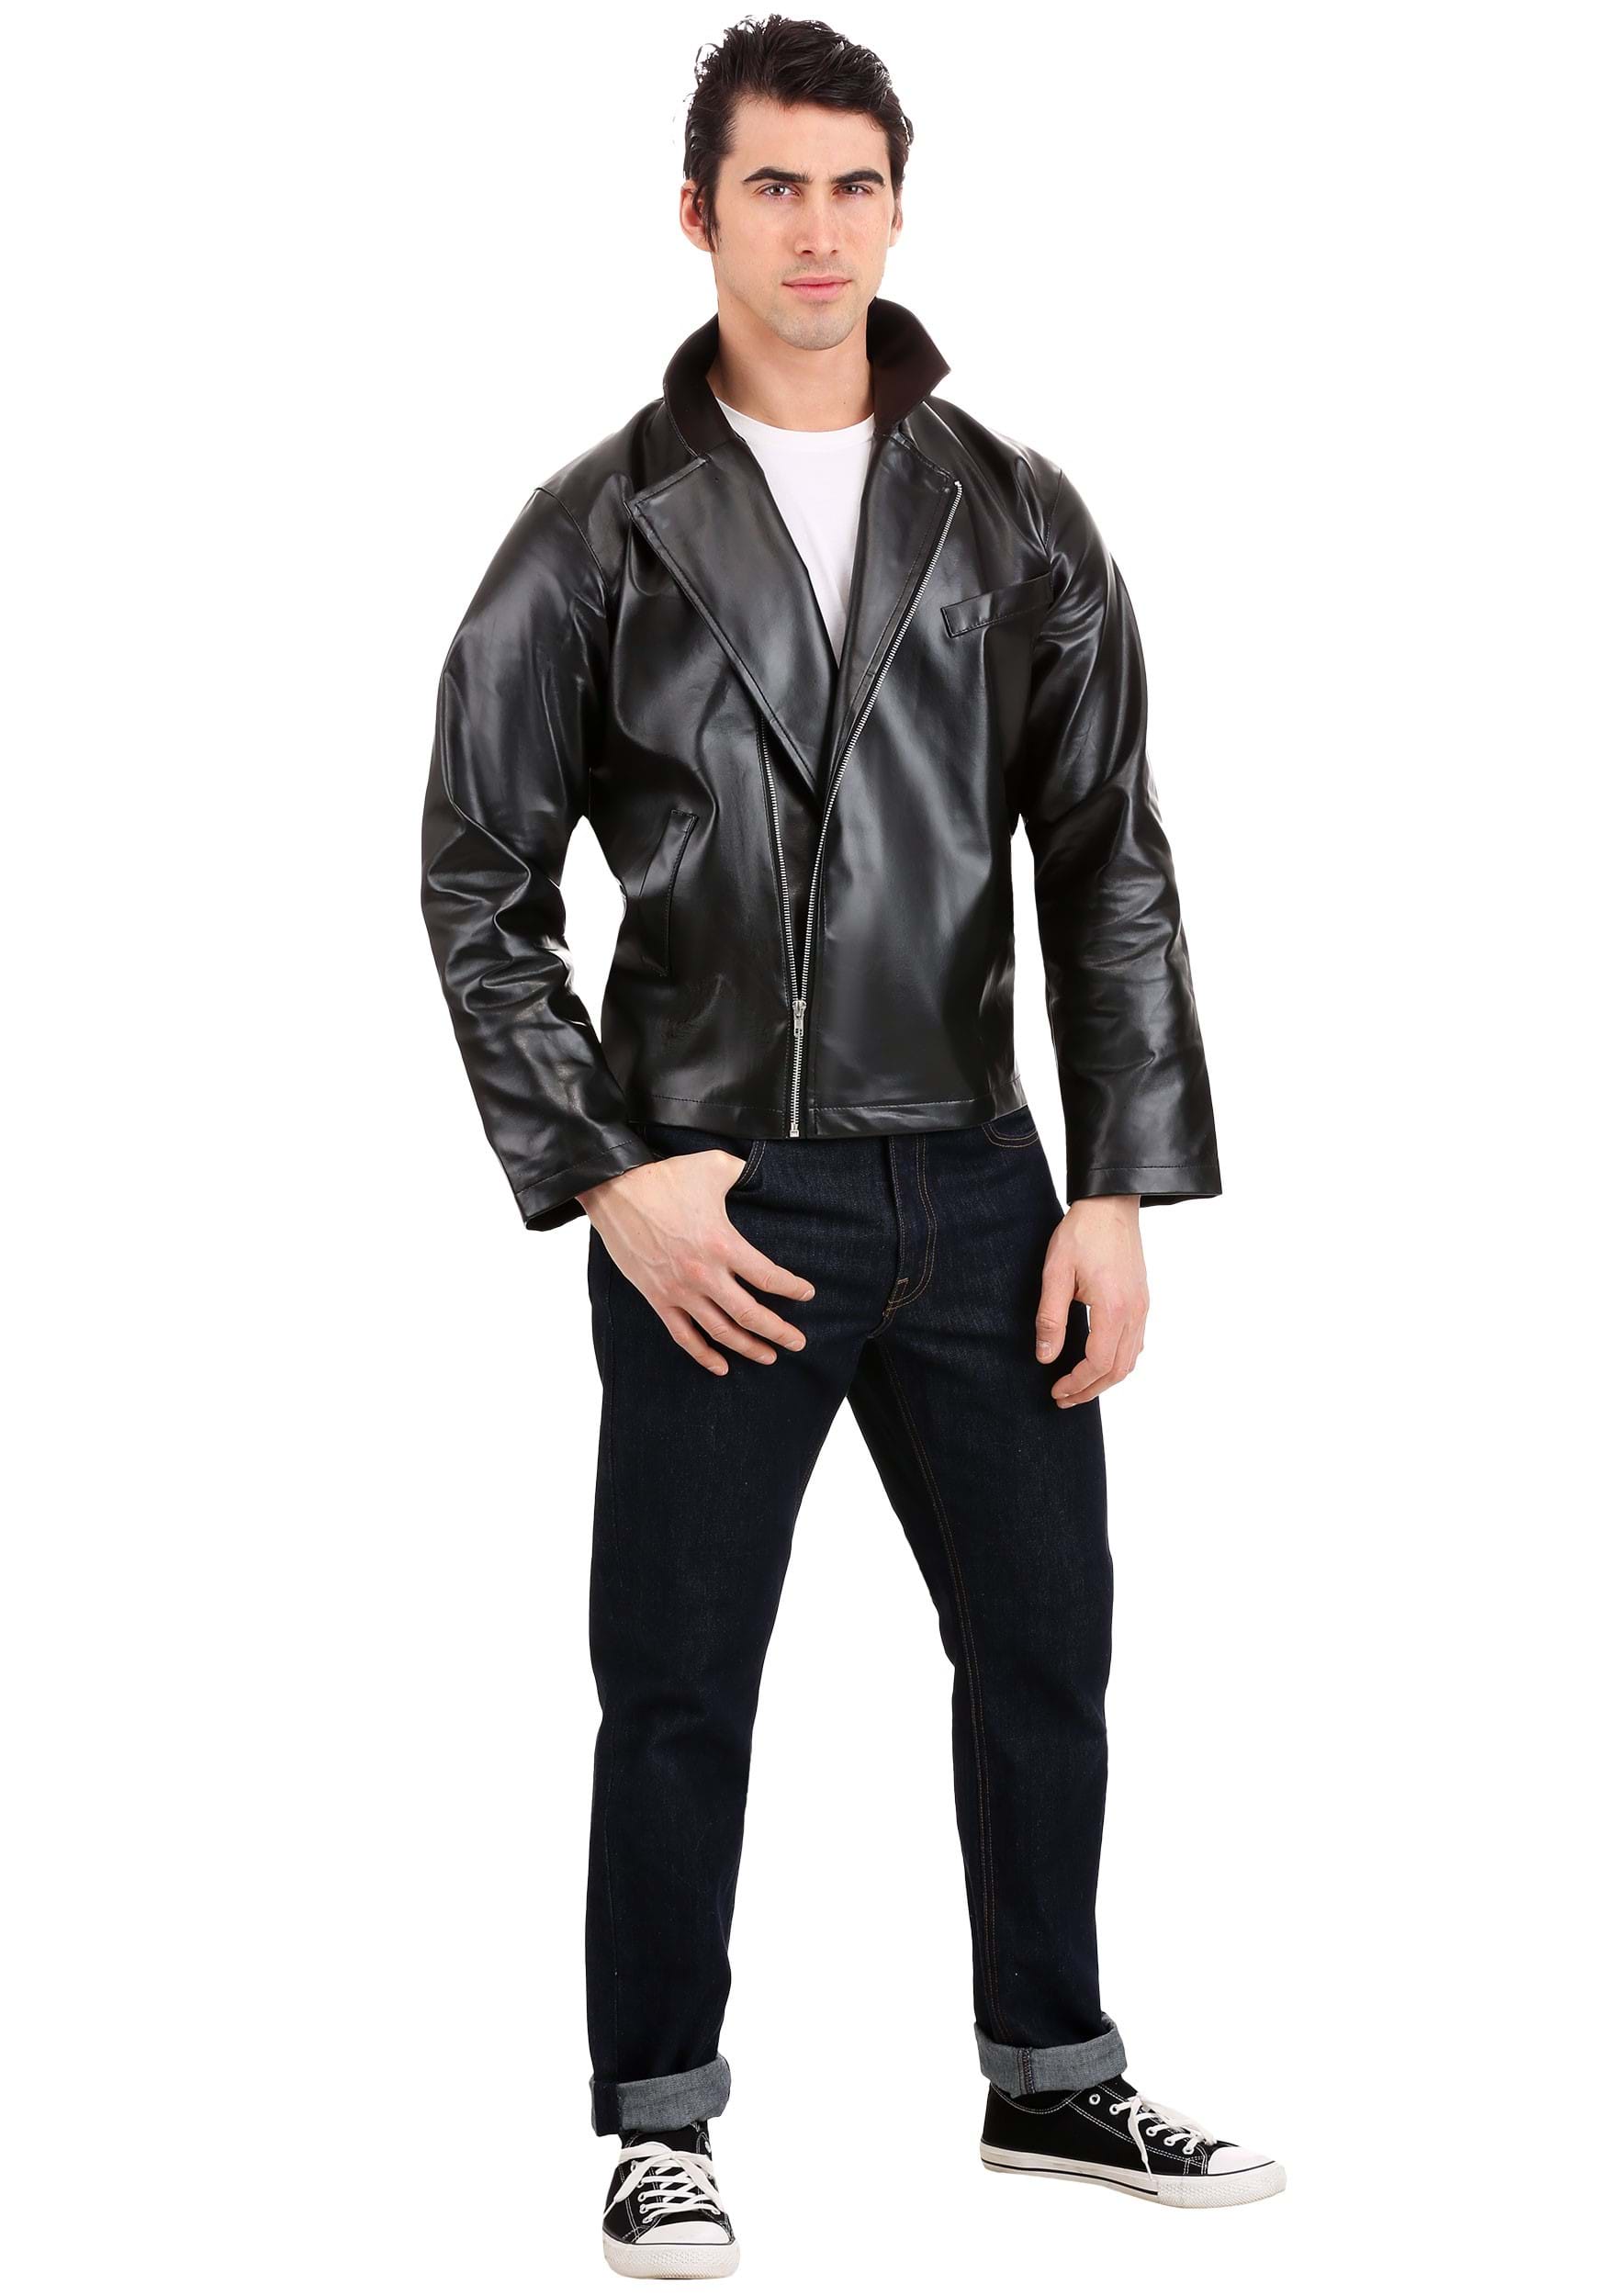 Image of Grease T-Birds Jacket  Plus Size Costume ID GRE6007PL-3X